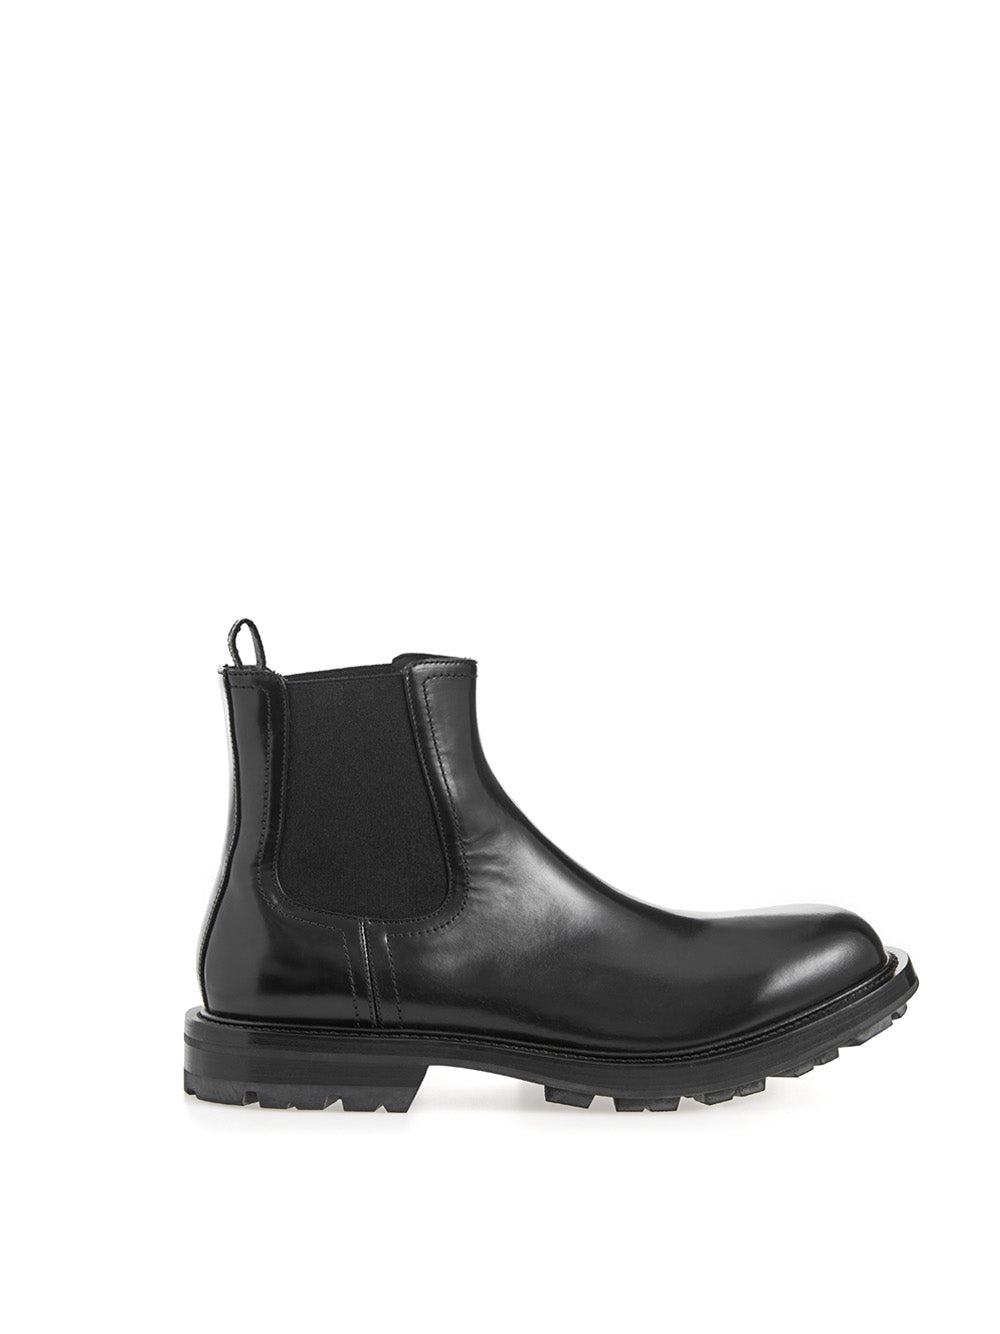 Alexander McQueen Black Leather Chelsea boots with Patent Leather Detail